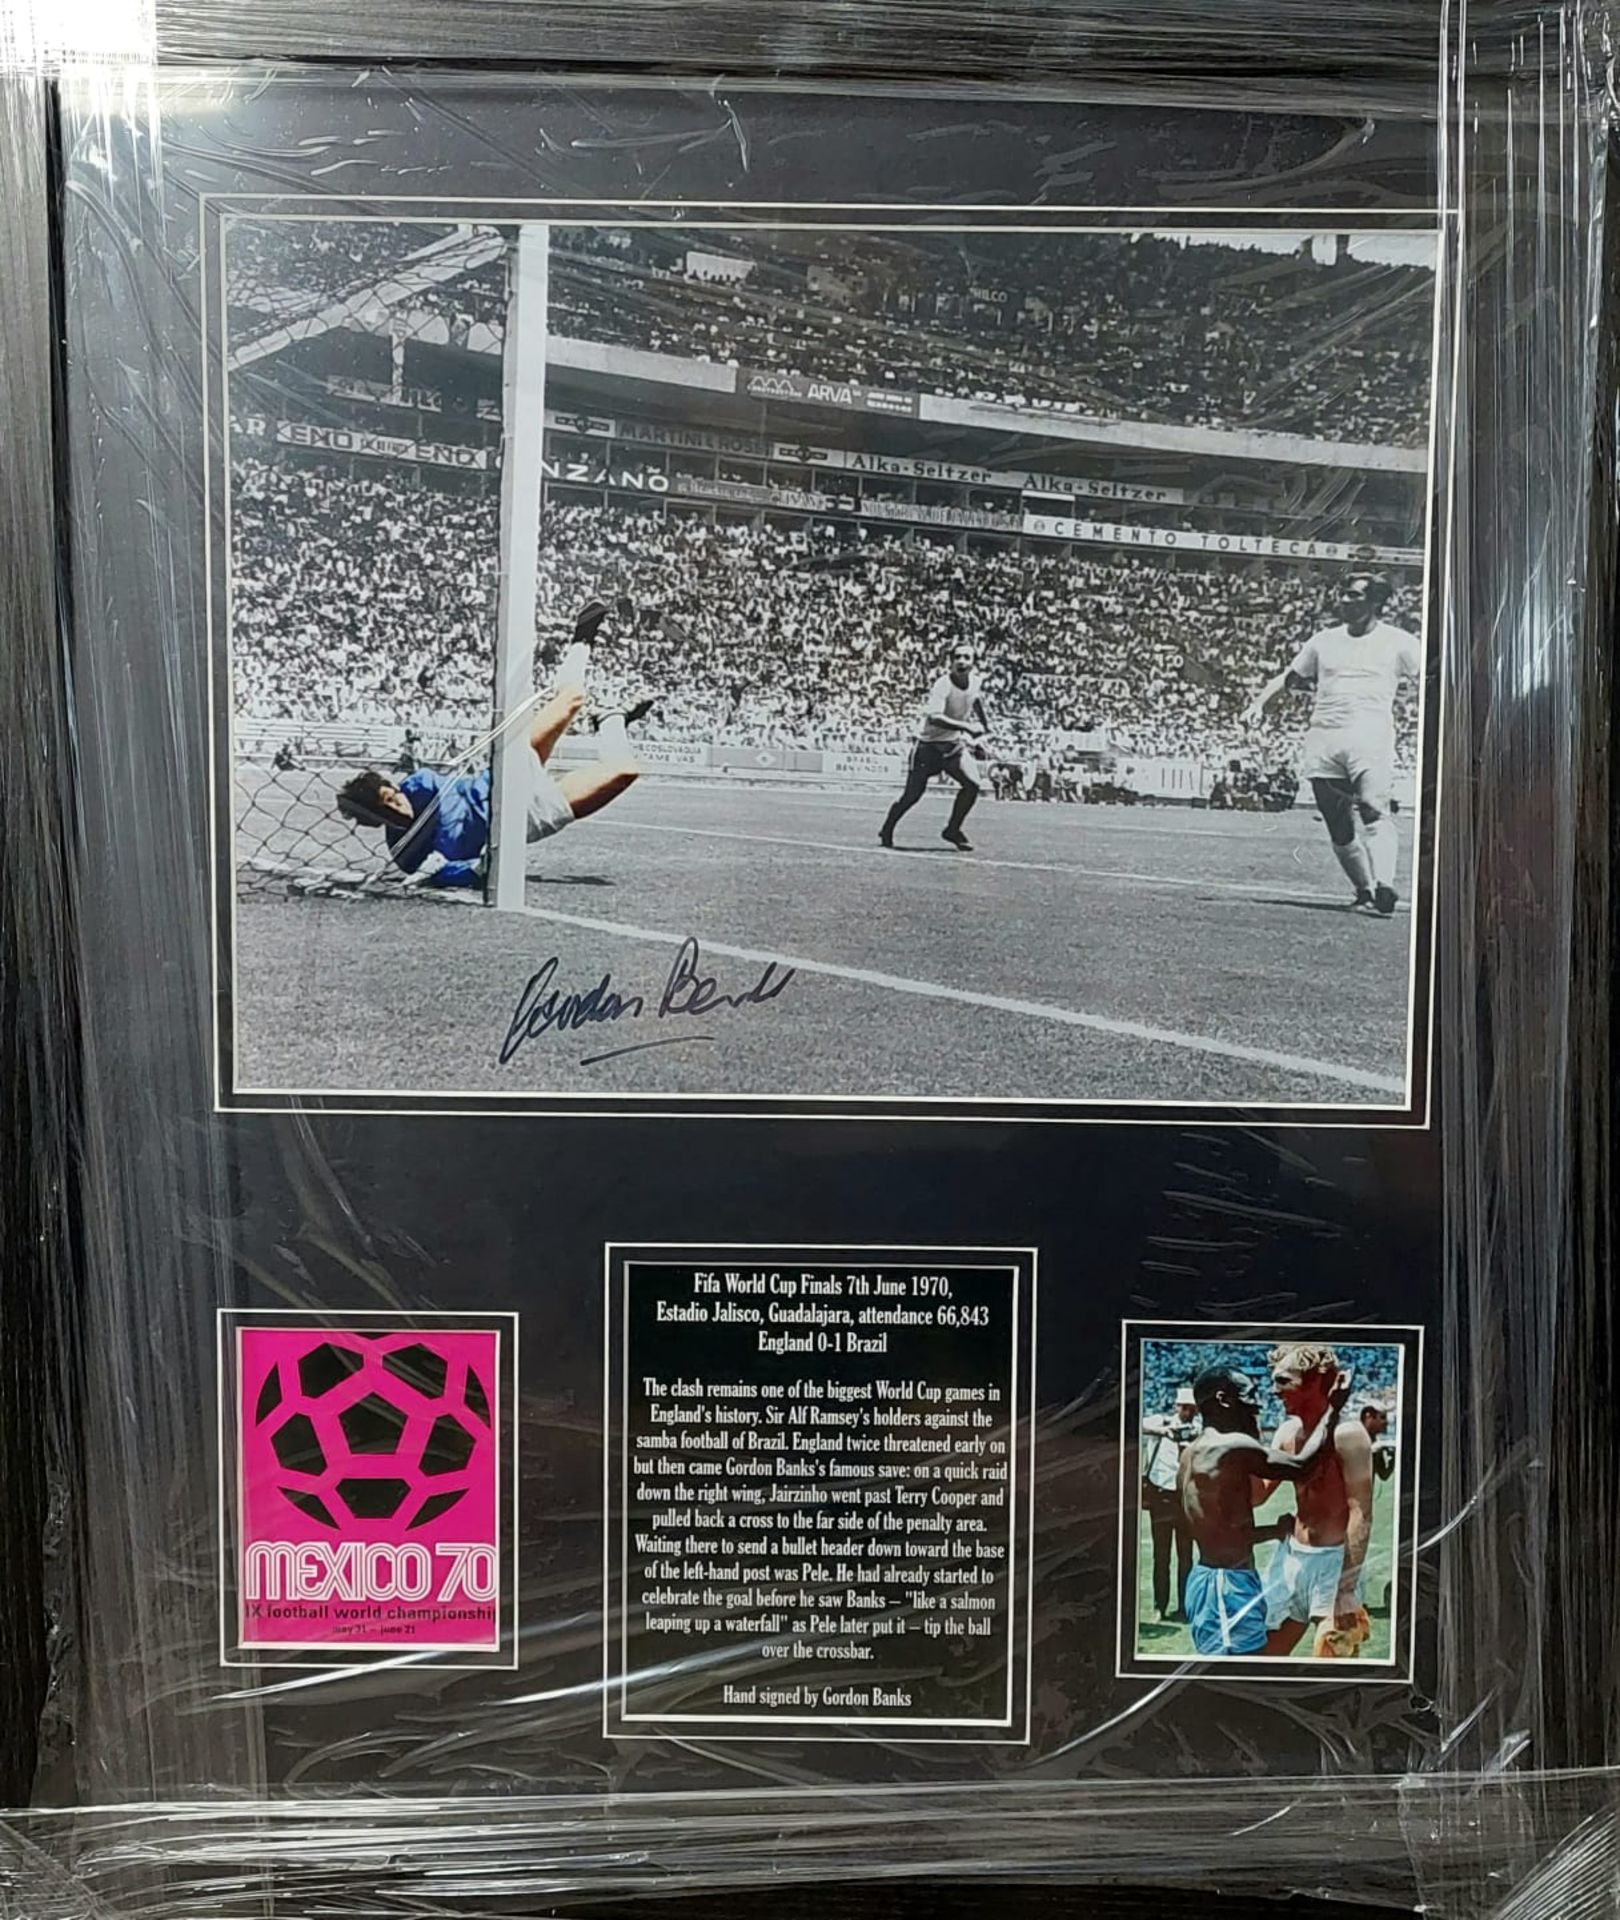 Gordon Banks Signed And Framed World Cup 1970 England Display Supplied with Certificate Of